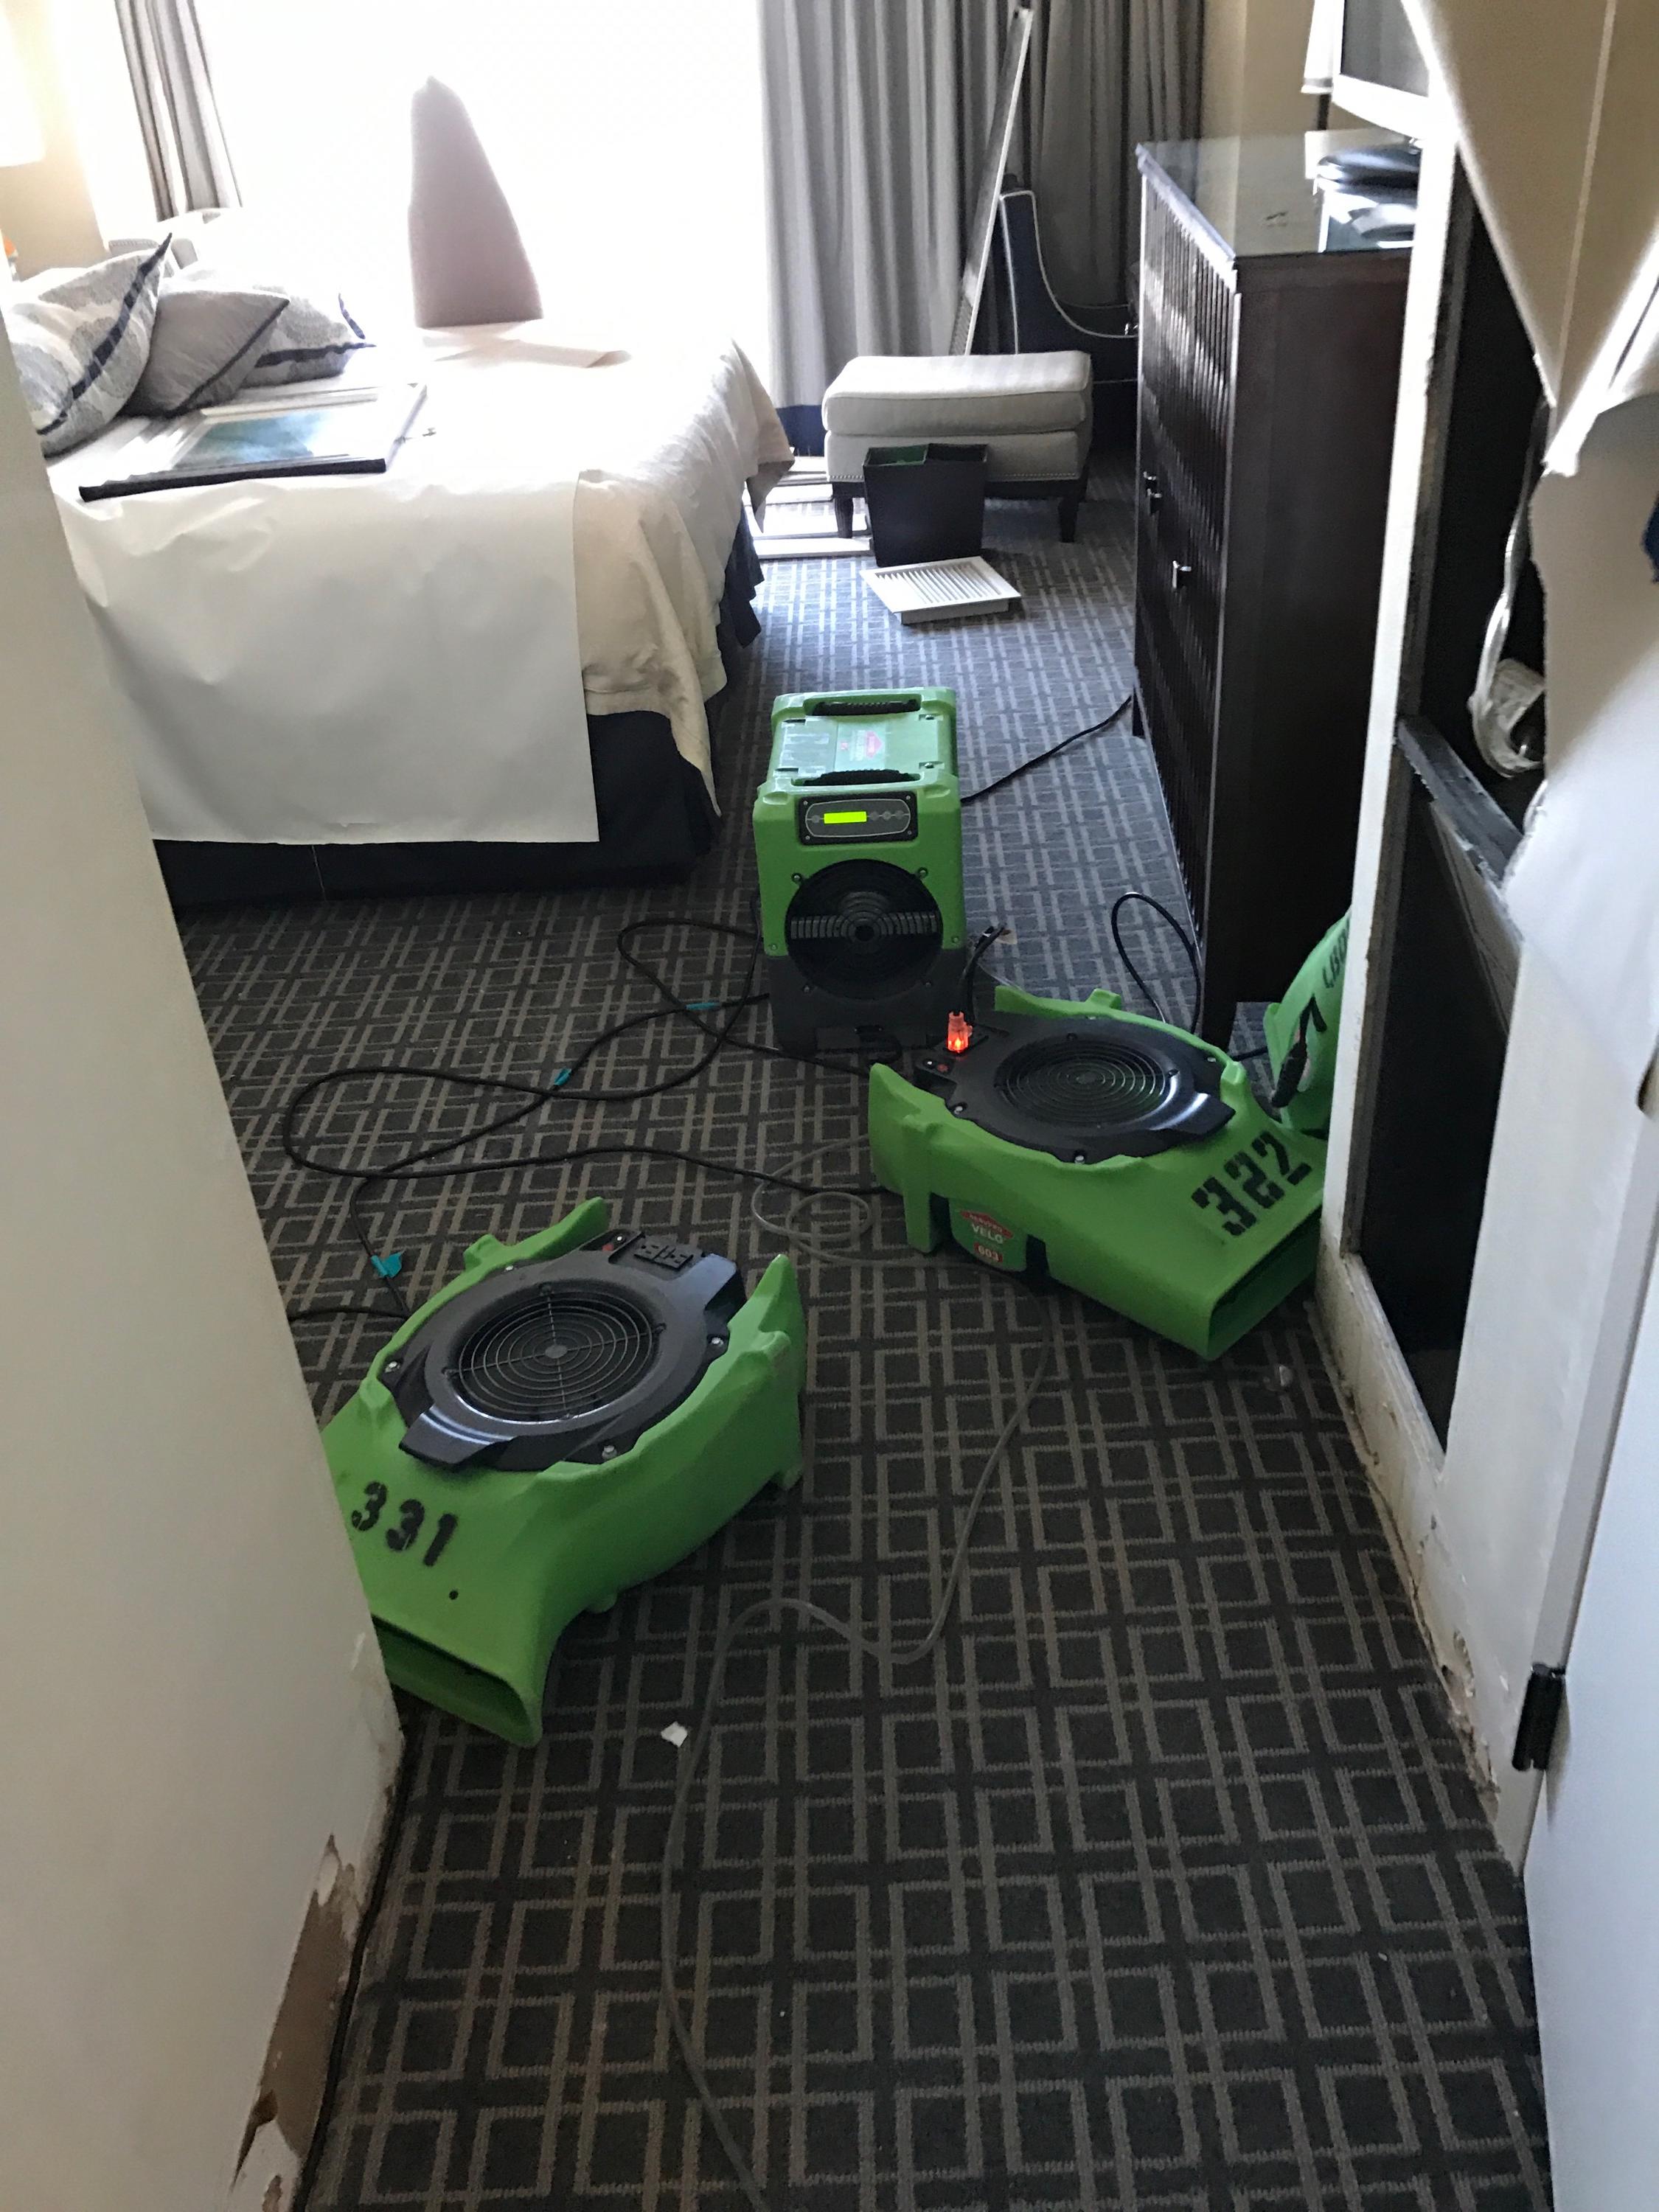 The SERVPRO equipment is up and running after a commercial loss.